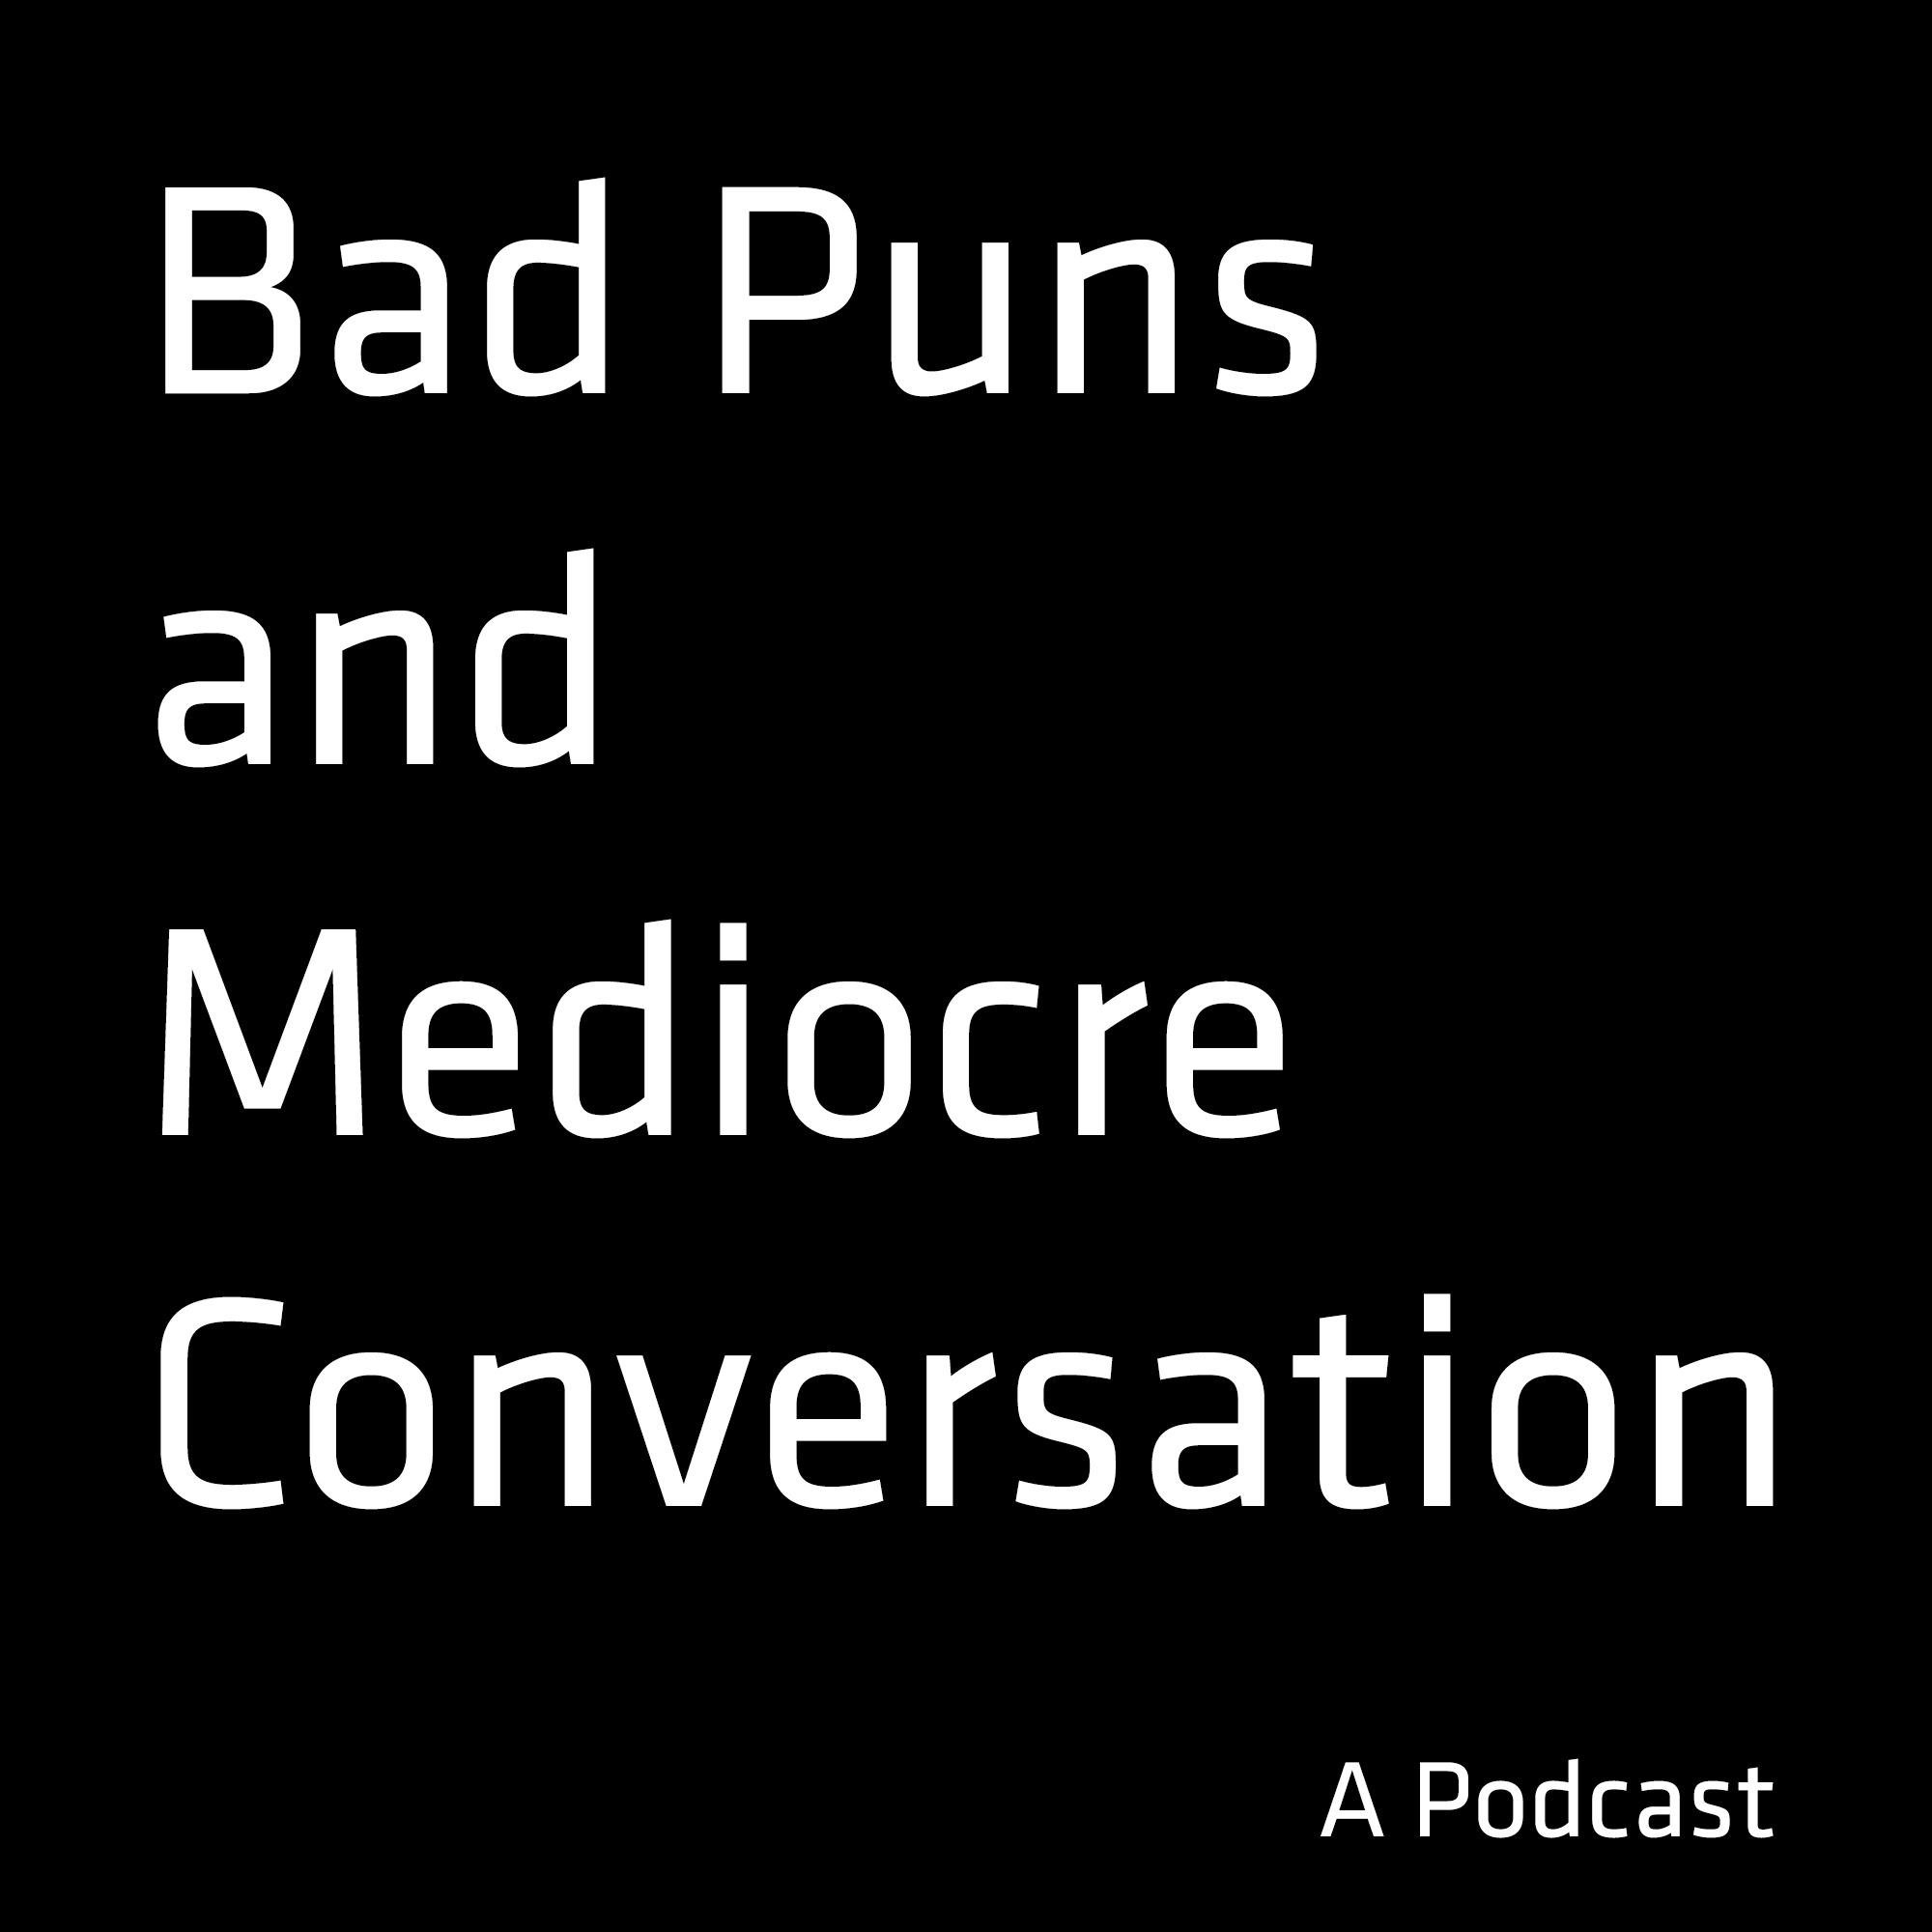 Bad Puns and Mediocre Conversation